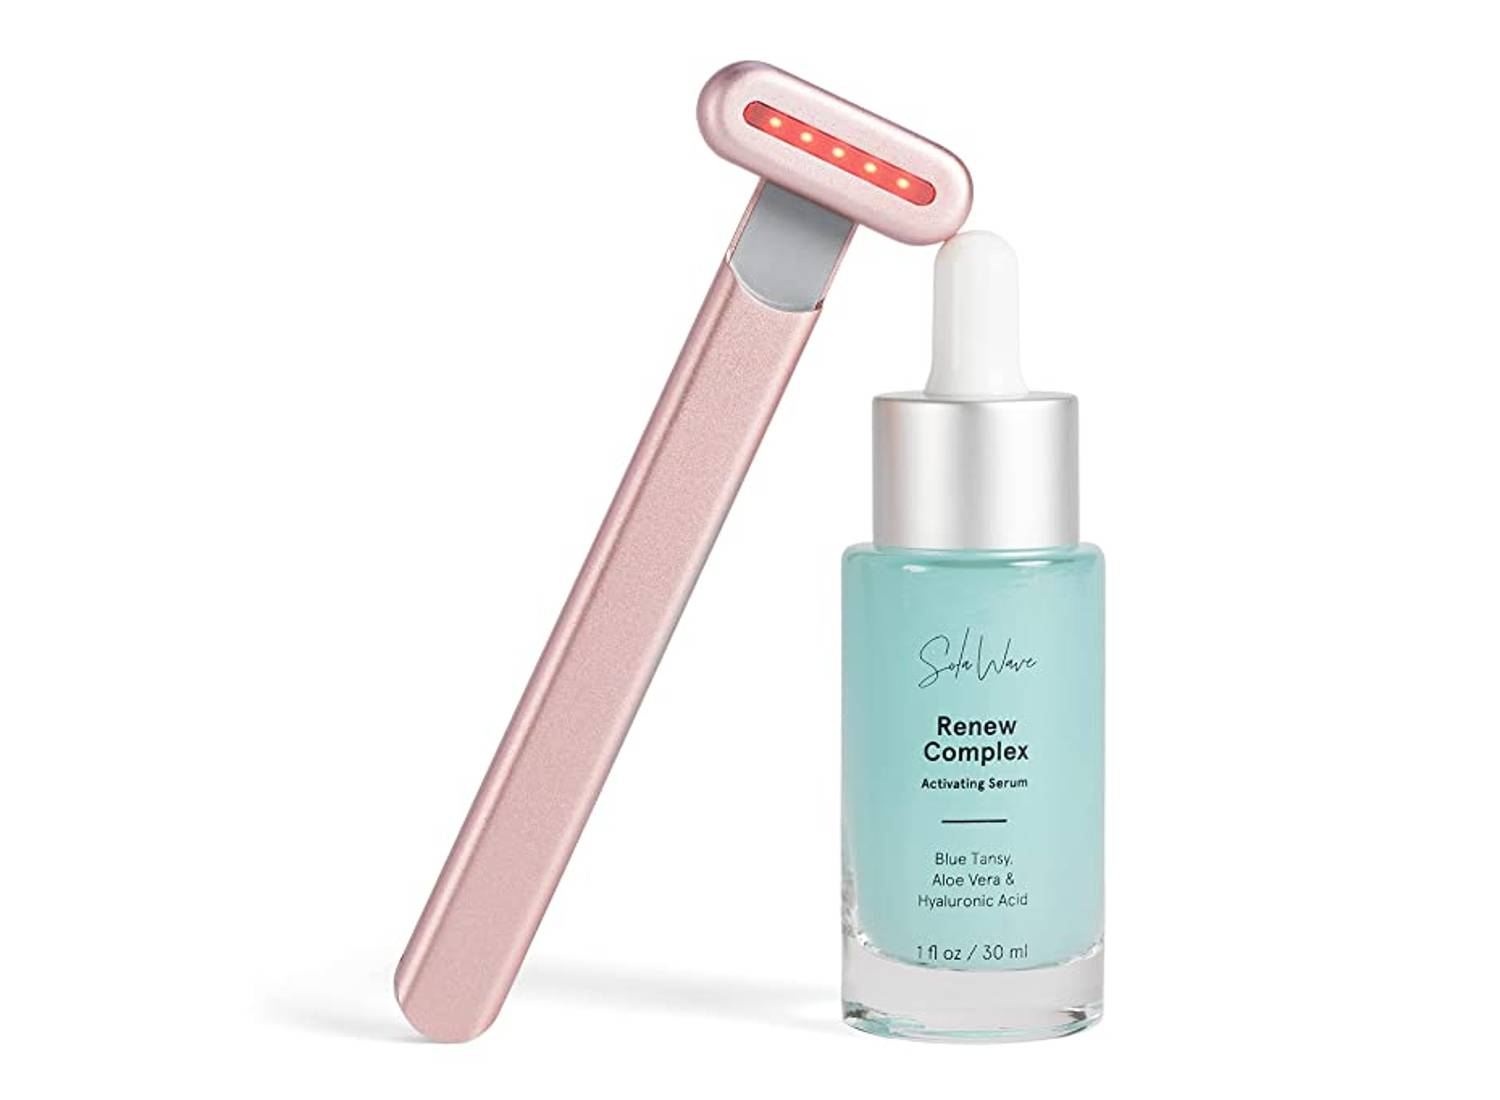 A red light skincare wand and a renewing facial serum